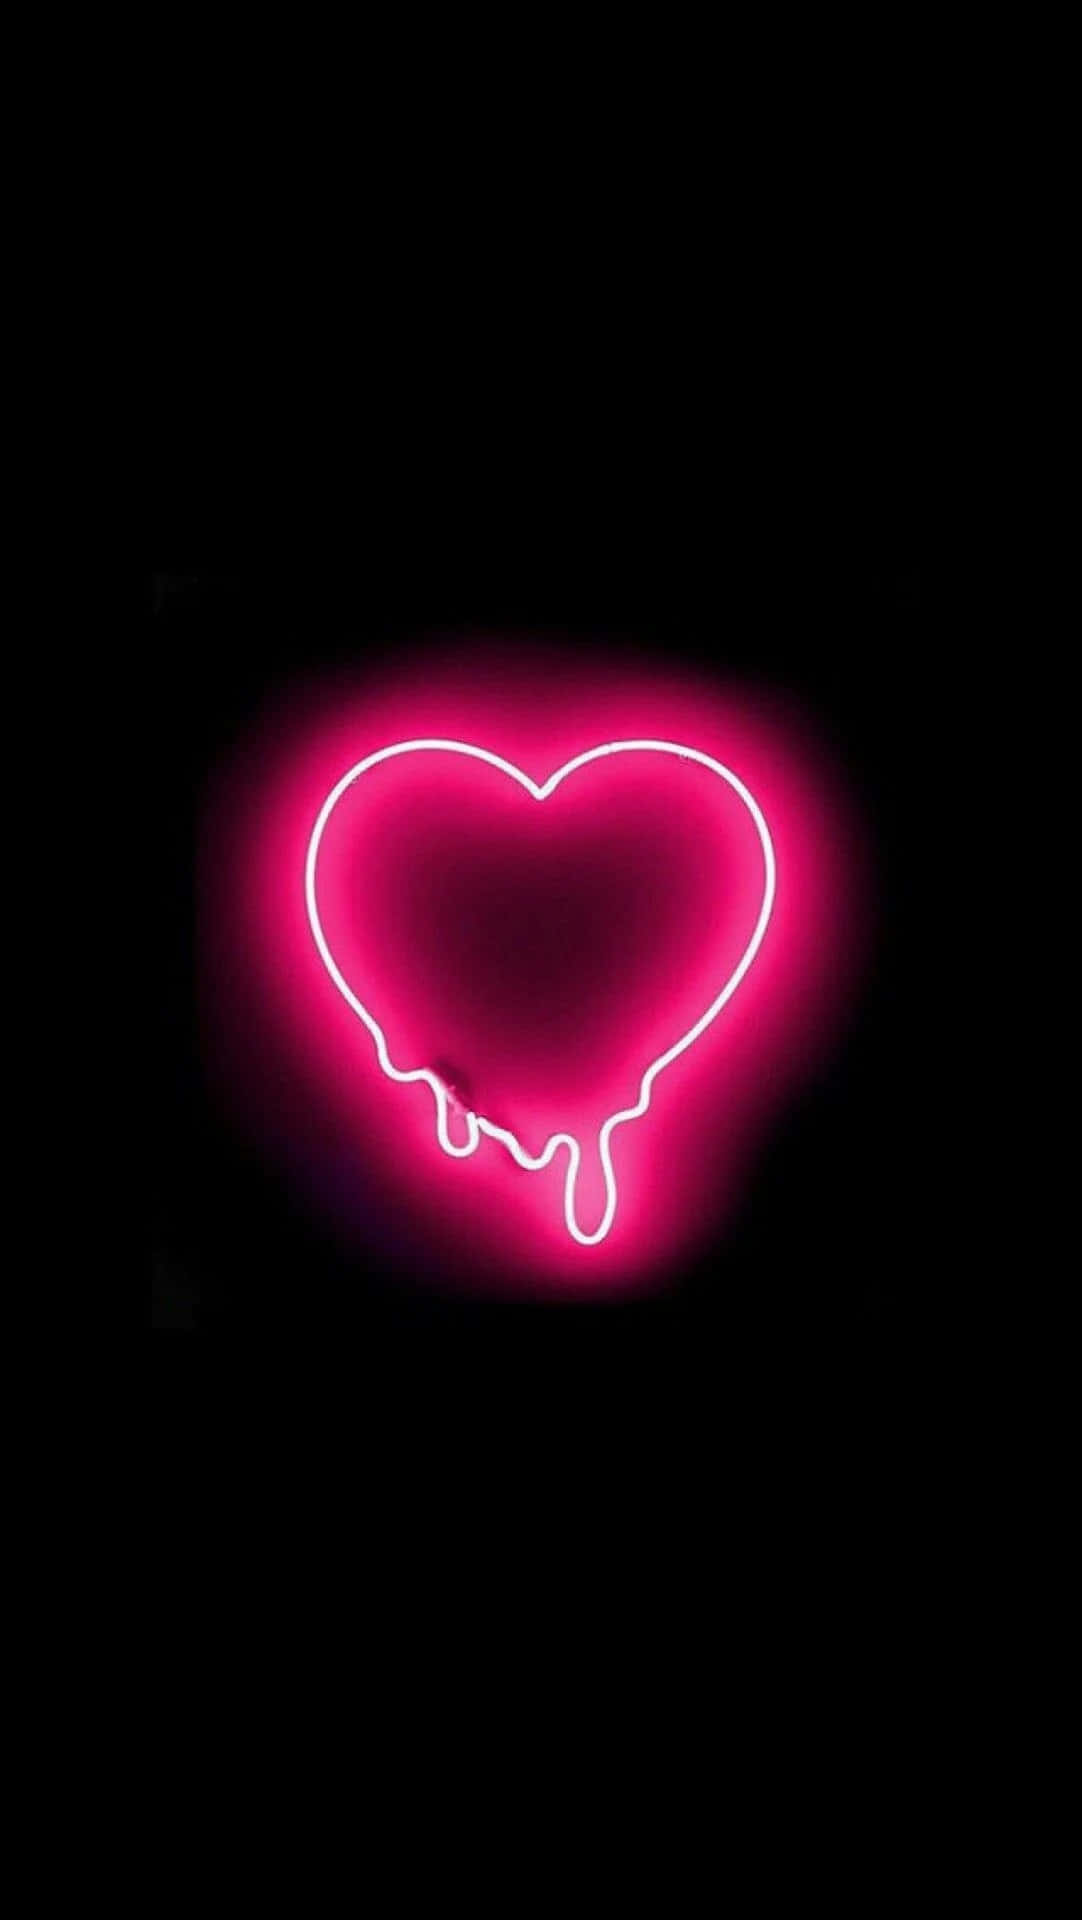 A Pink Neon Heart On A Black Background